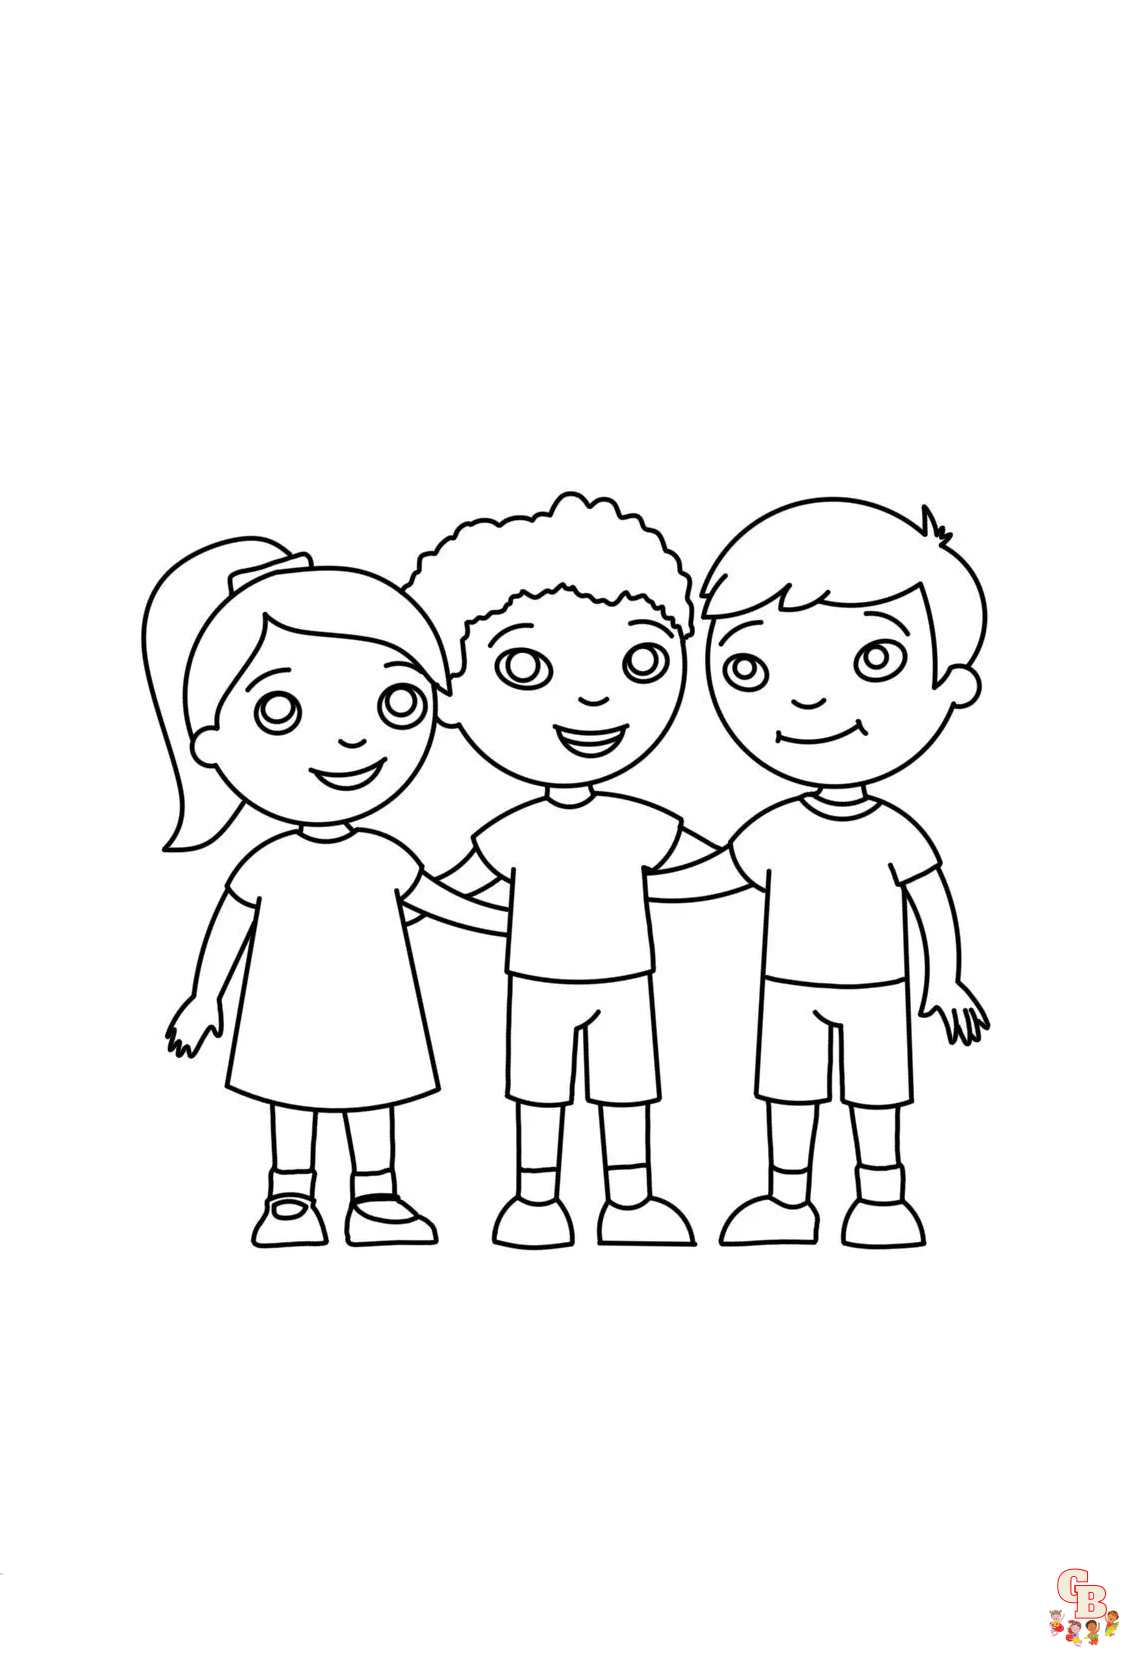 Friendship Coloring Pages 2